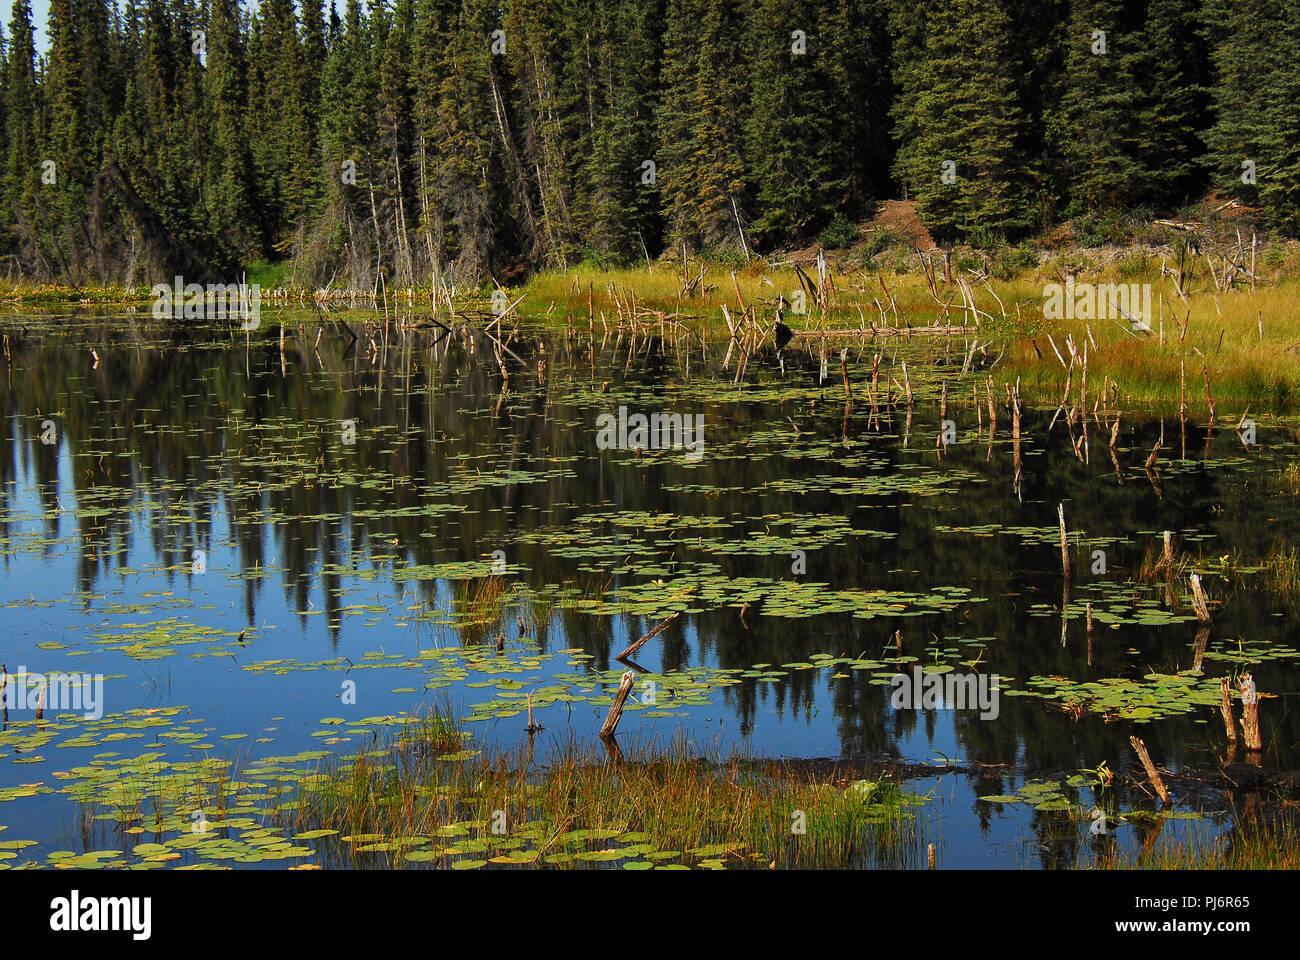 The natural beauty of wilderness reflections in a lily pond in the borough of Wrangell, Alaska. Stock Photo